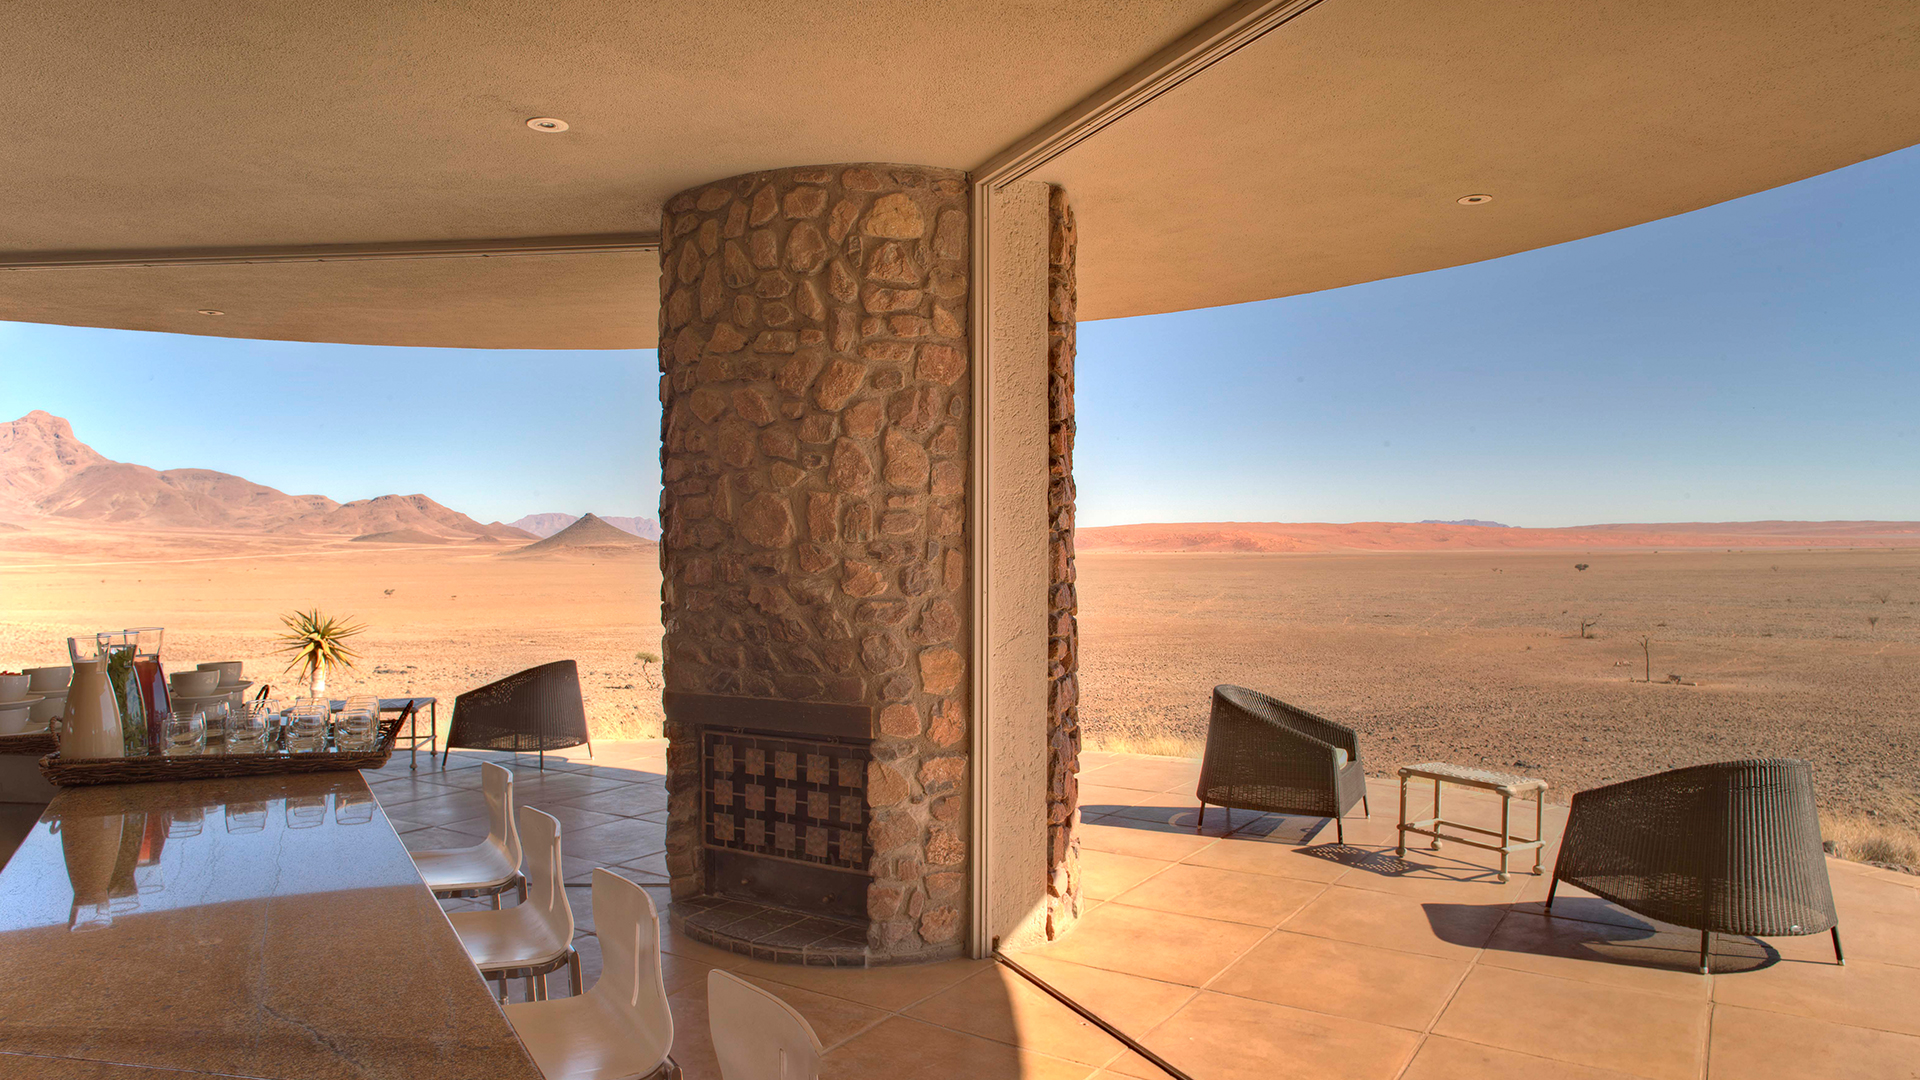 sitting area looking out over desert